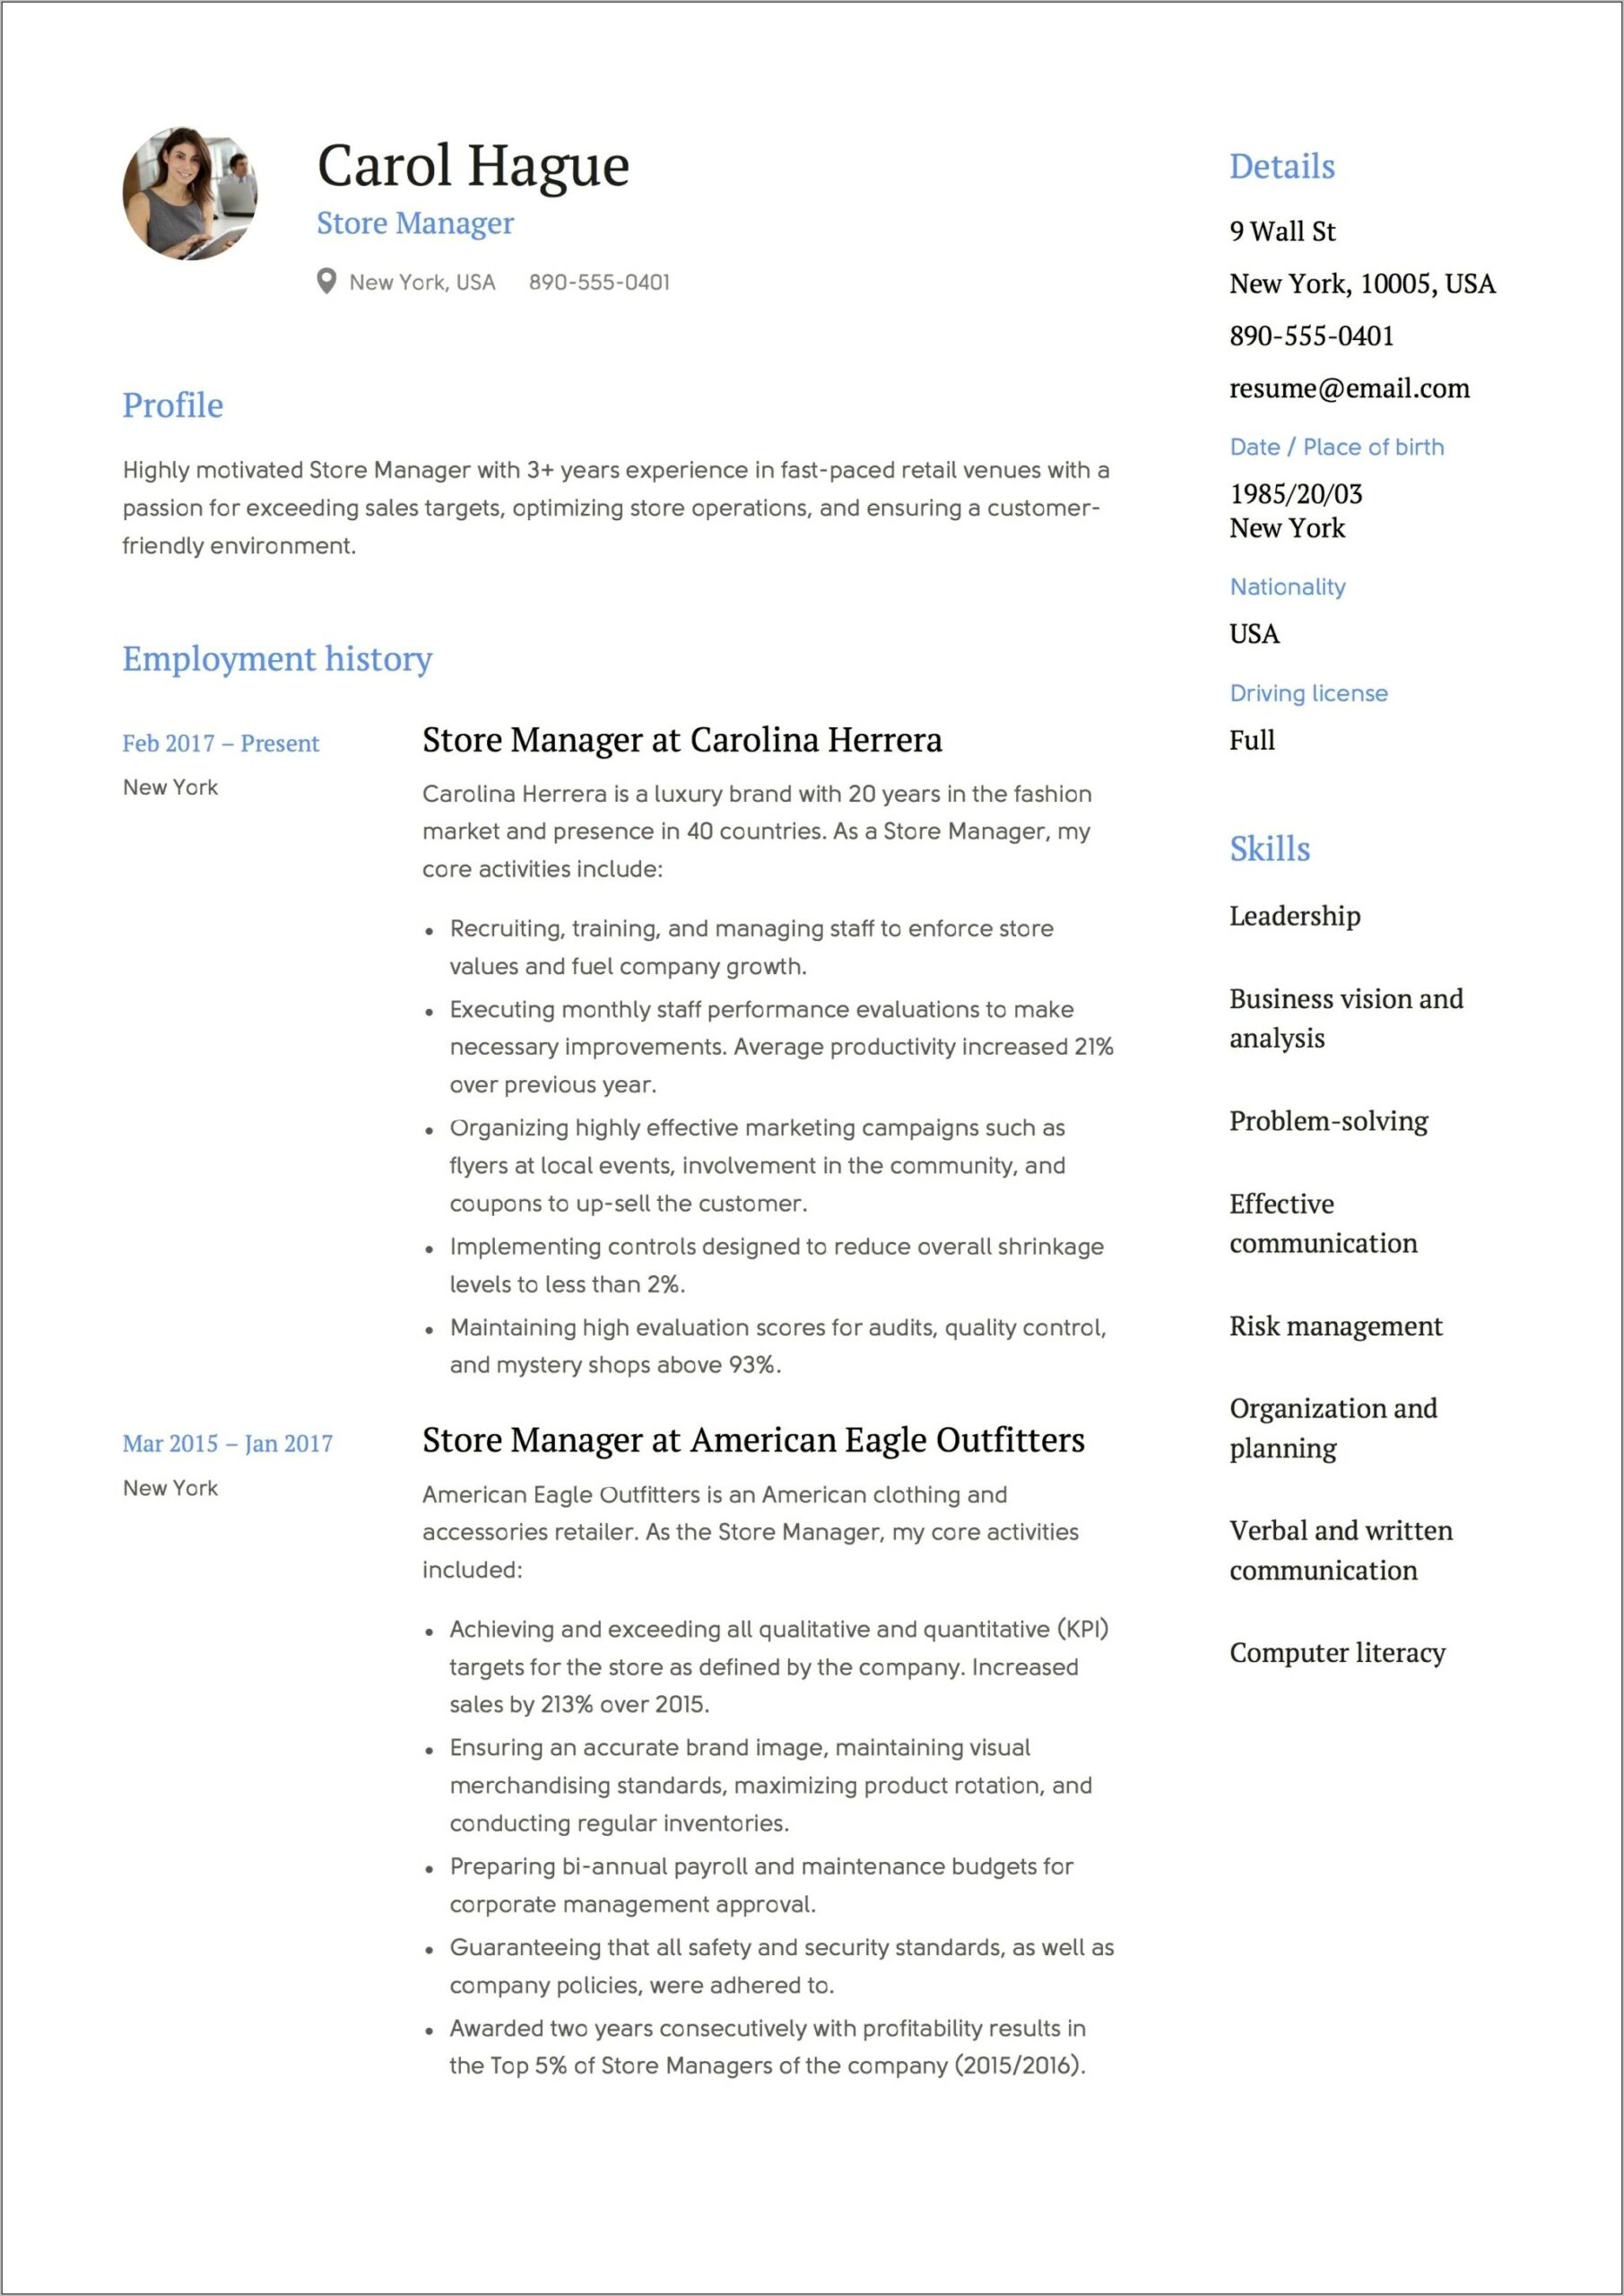 American Eagle Merchandise Manager Resume